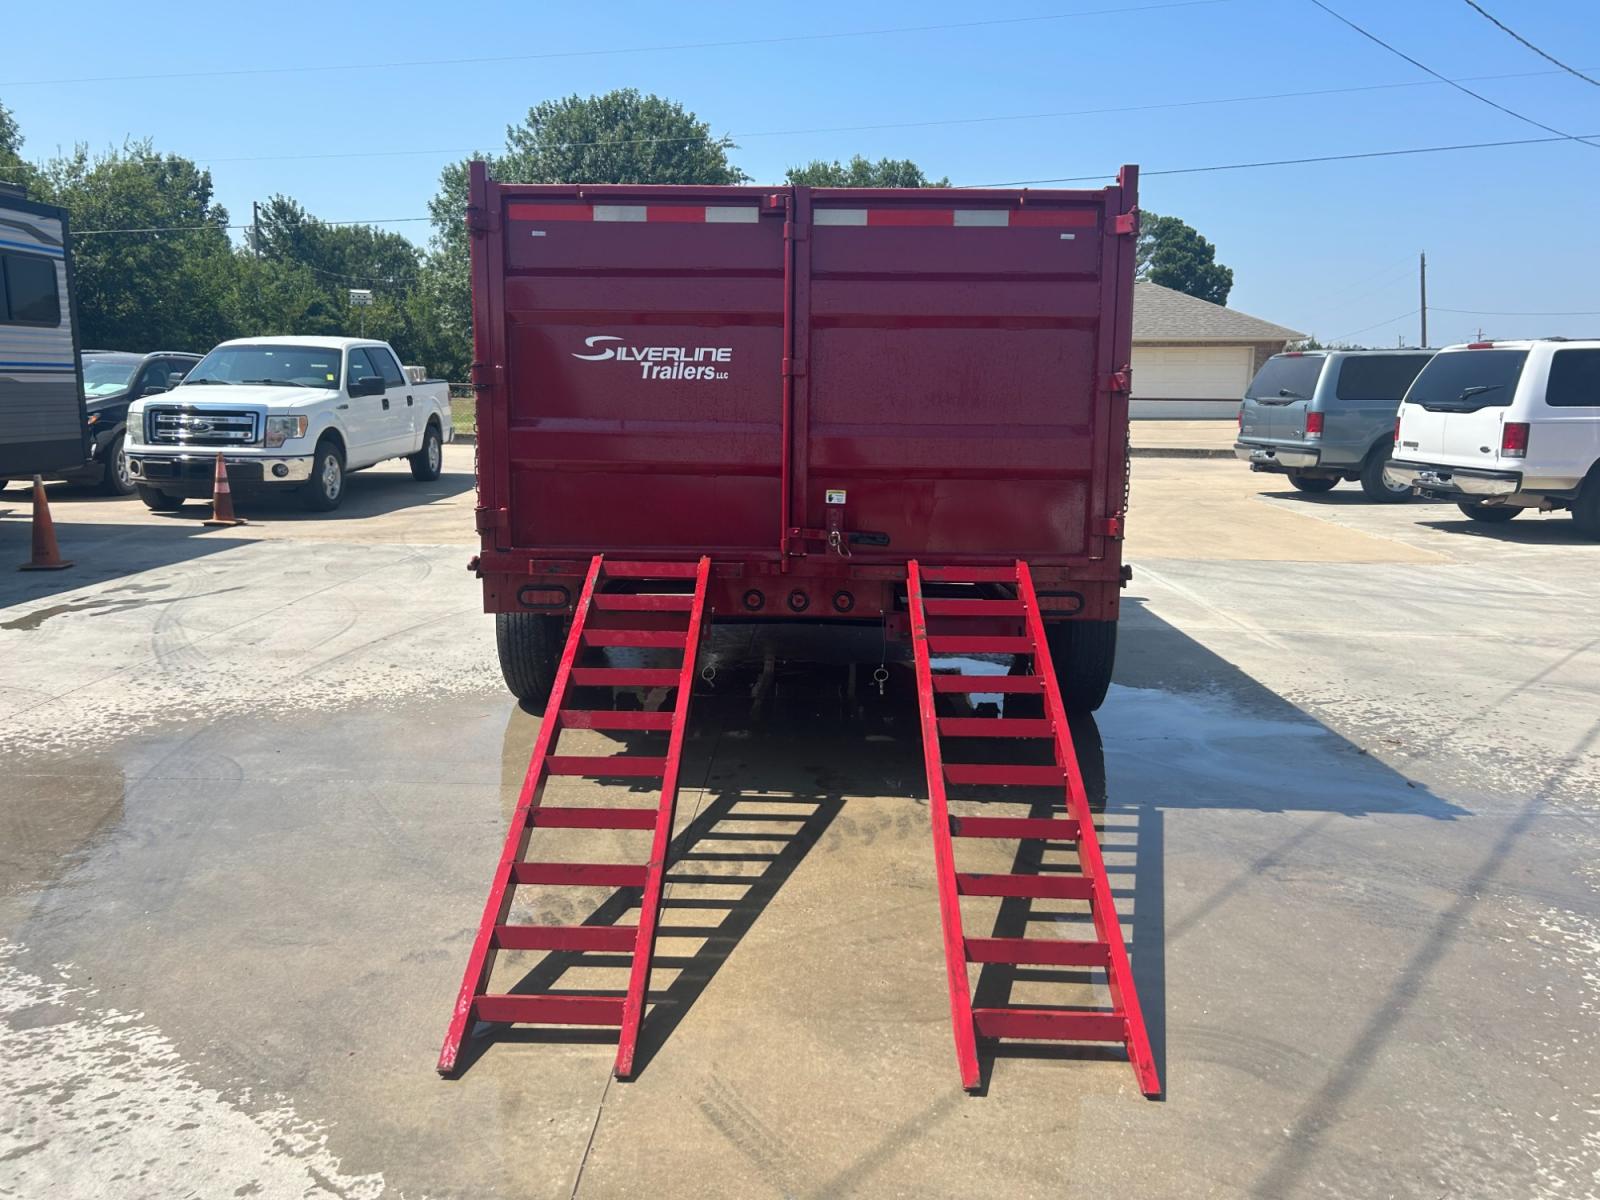 2022 RED EAST TEXAS TRAILER DUMPBED (58SBD1420NE) , located at 17760 Hwy 62, Morris, OK, 74445, 35.609104, -95.877060 - 2022 SILVERLINE TRAILER 83X14 FEATURES 2 7,000 LB DEXTER SPRING AXLES, 2 ELEC FSA BRAKES, COUPLER 2-5/16" ADJUSTABLE (6 HOLE), DIAMOND PLATE FENDERS, 16" CROSS-MEMBERS, 48" DUMP SIDES, 48" 3 WAY GATE, MESH ROLL TARP SYSTEM, JACK SPRING LOADED DROP LEG, 4 3'' D-RINGS, TOOL BOX IN TONGUE, SCISSOR HOIS - Photo #7